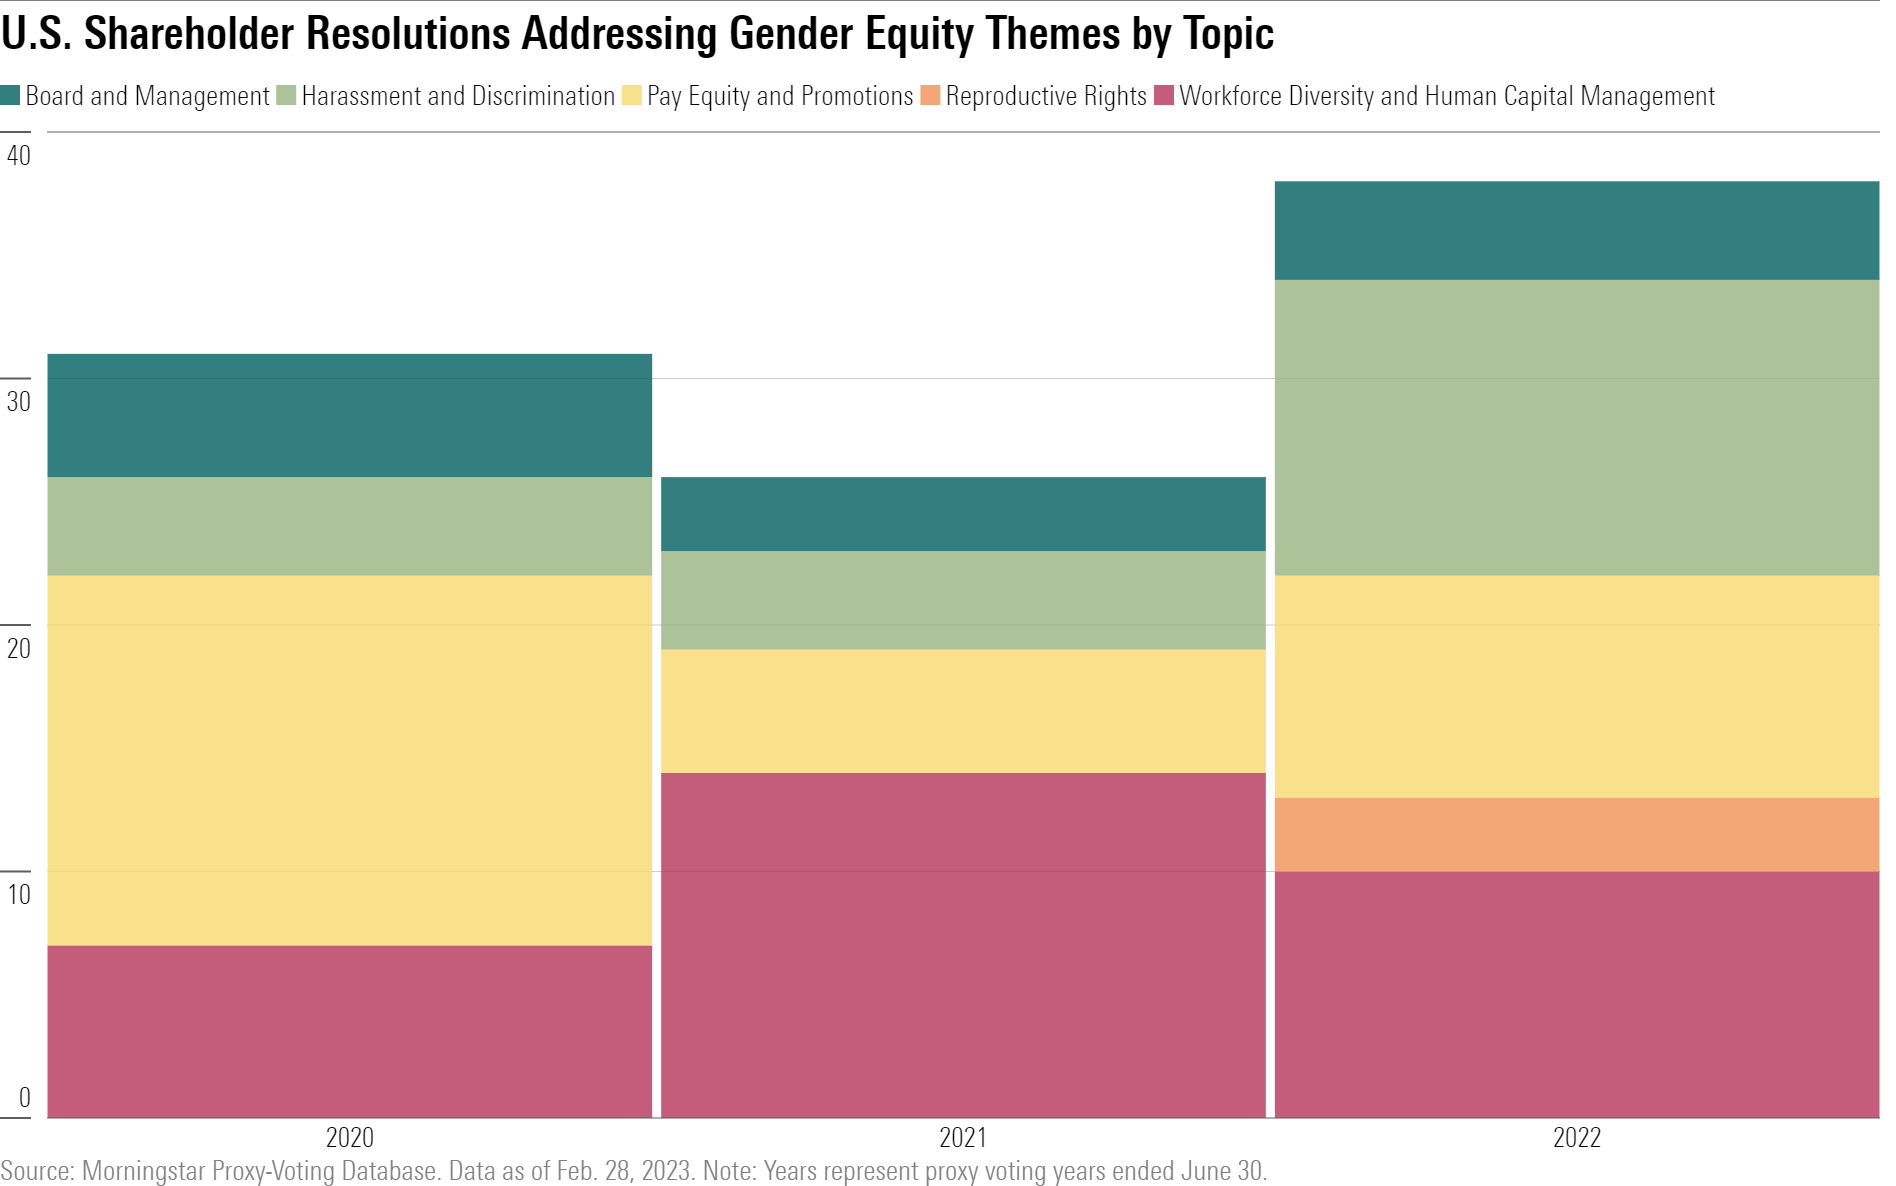 A bar chart showing that the topics covered by resolutions addressing gender equity have widened over the past three years.